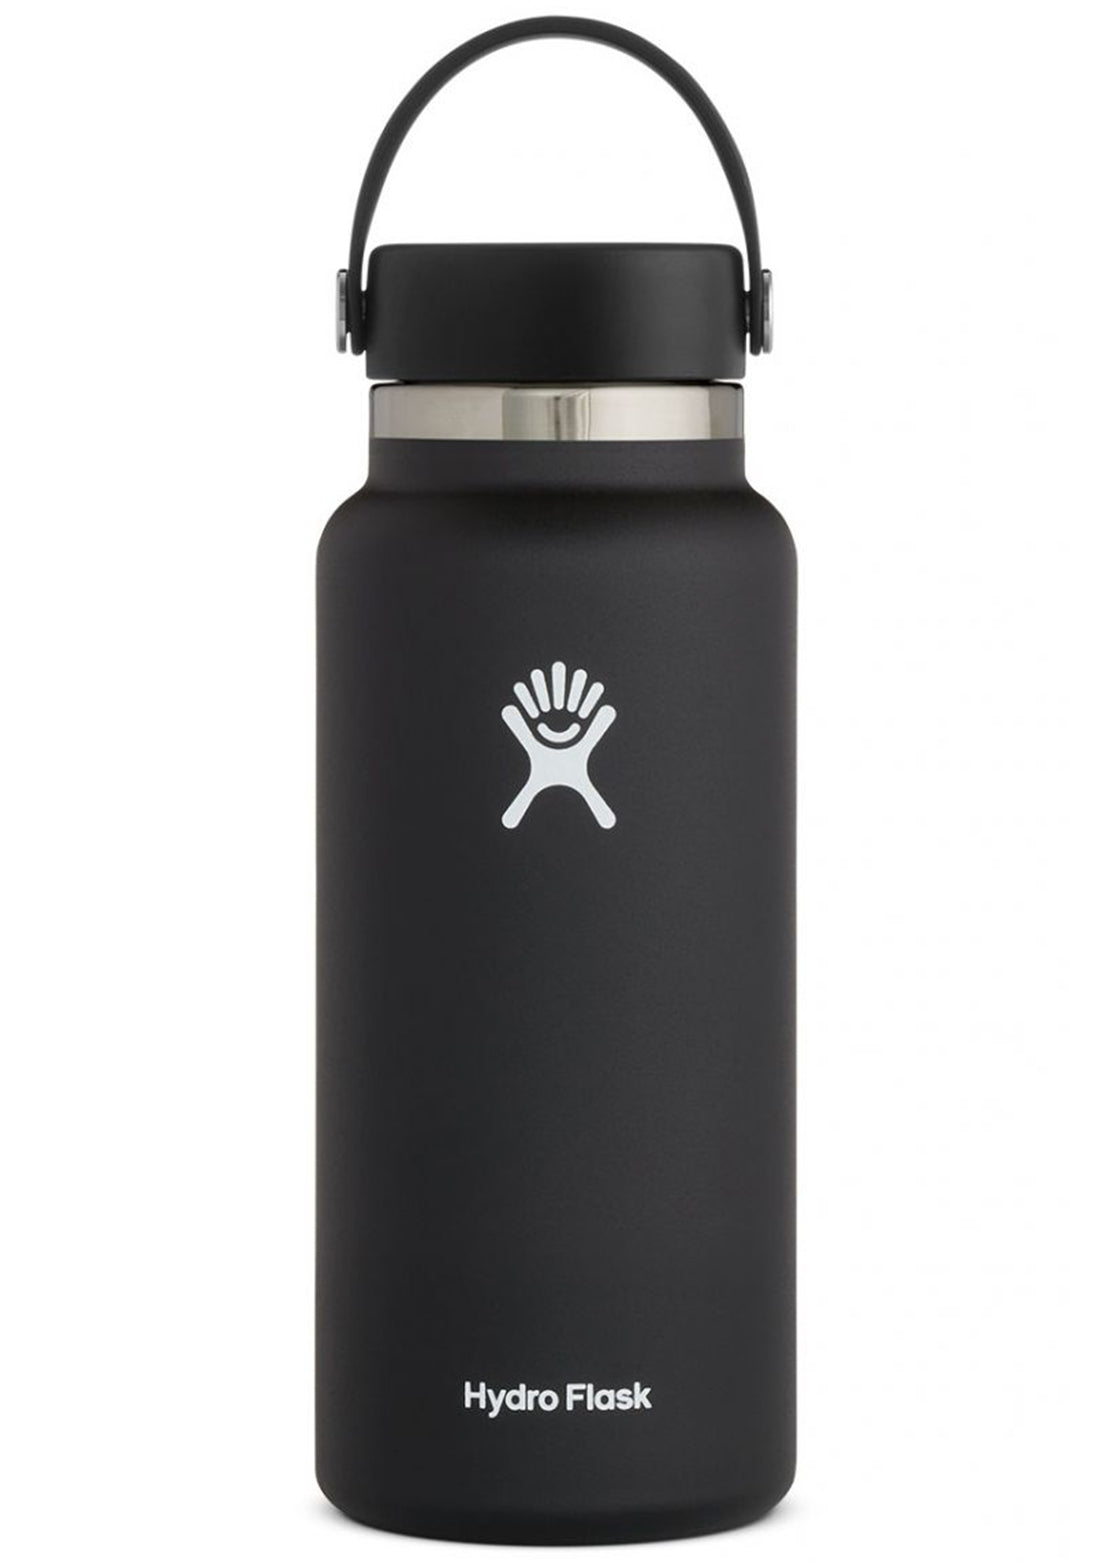 Hydro Flask 32oz Wide Mouth Insulated Bottle Black